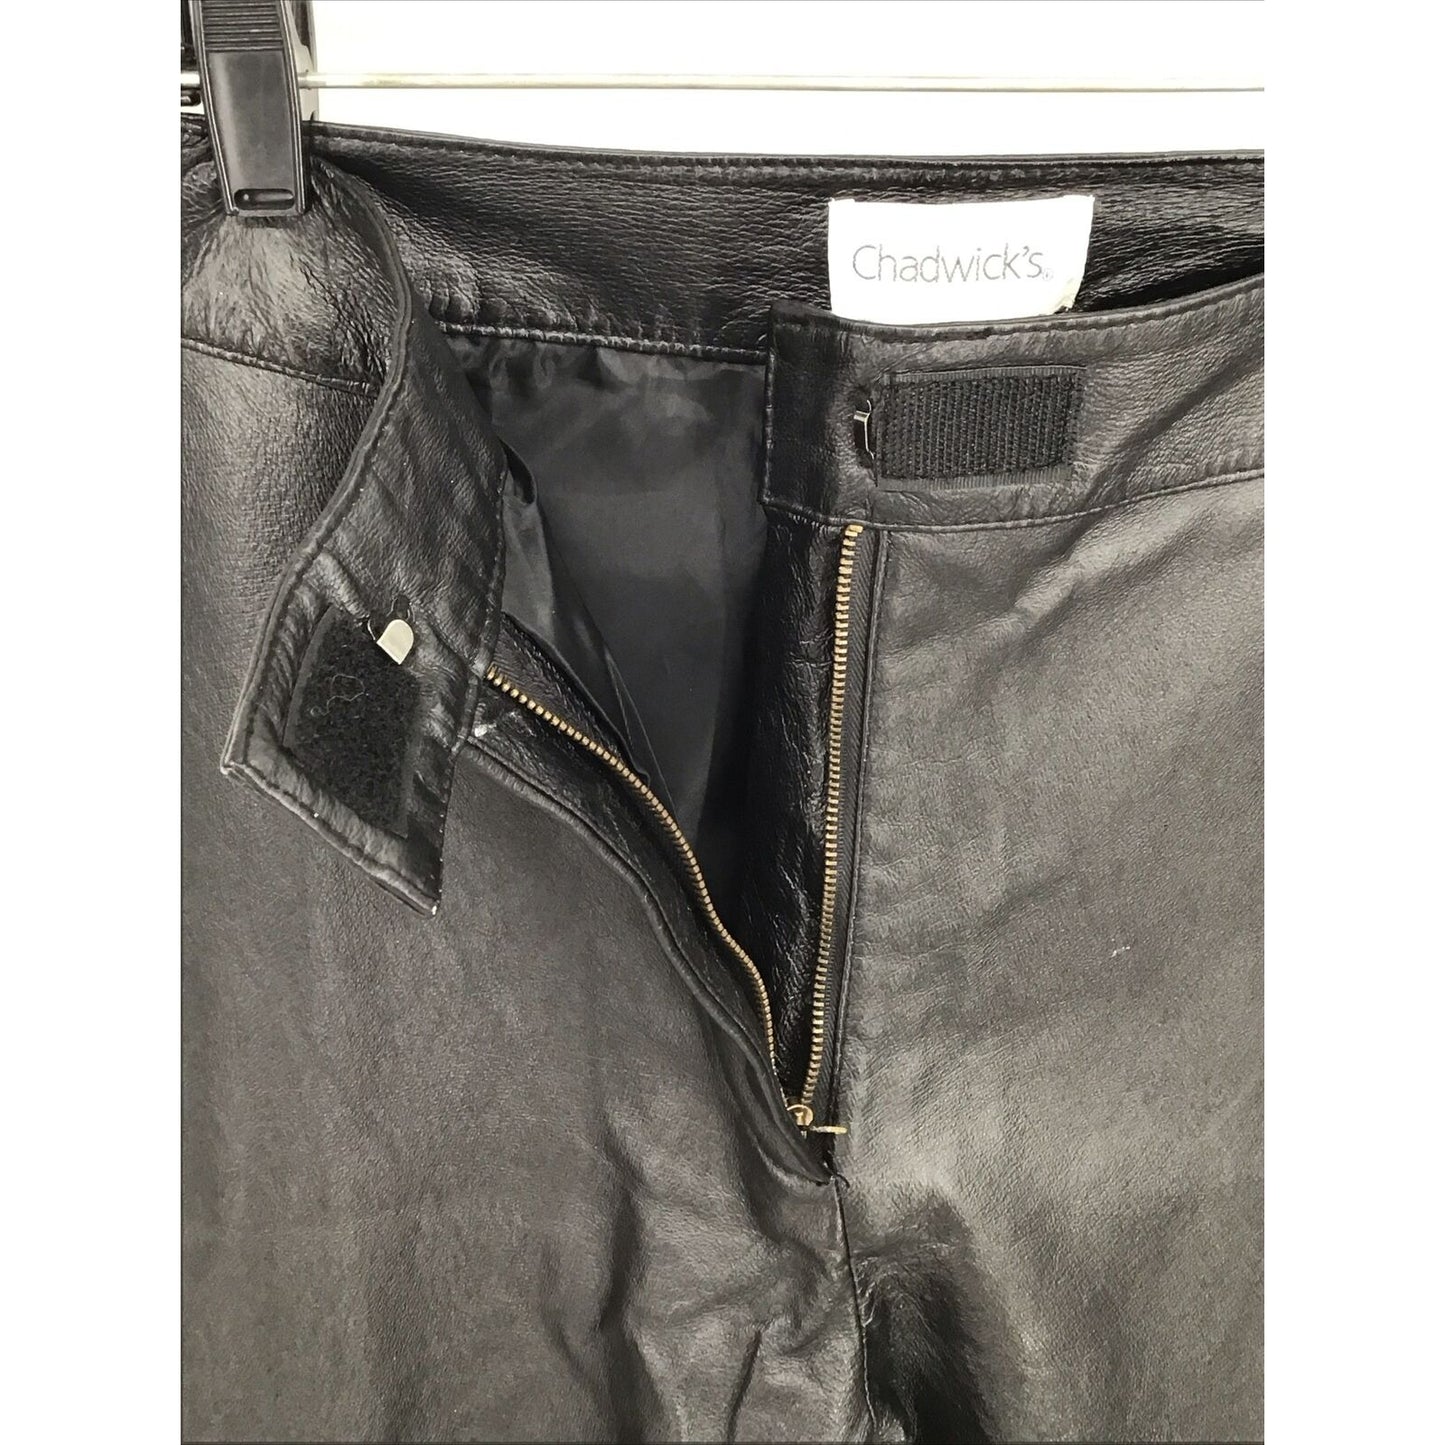 Black Leather Pants, Size 10, Fully Lined , by Chadwicks #1009